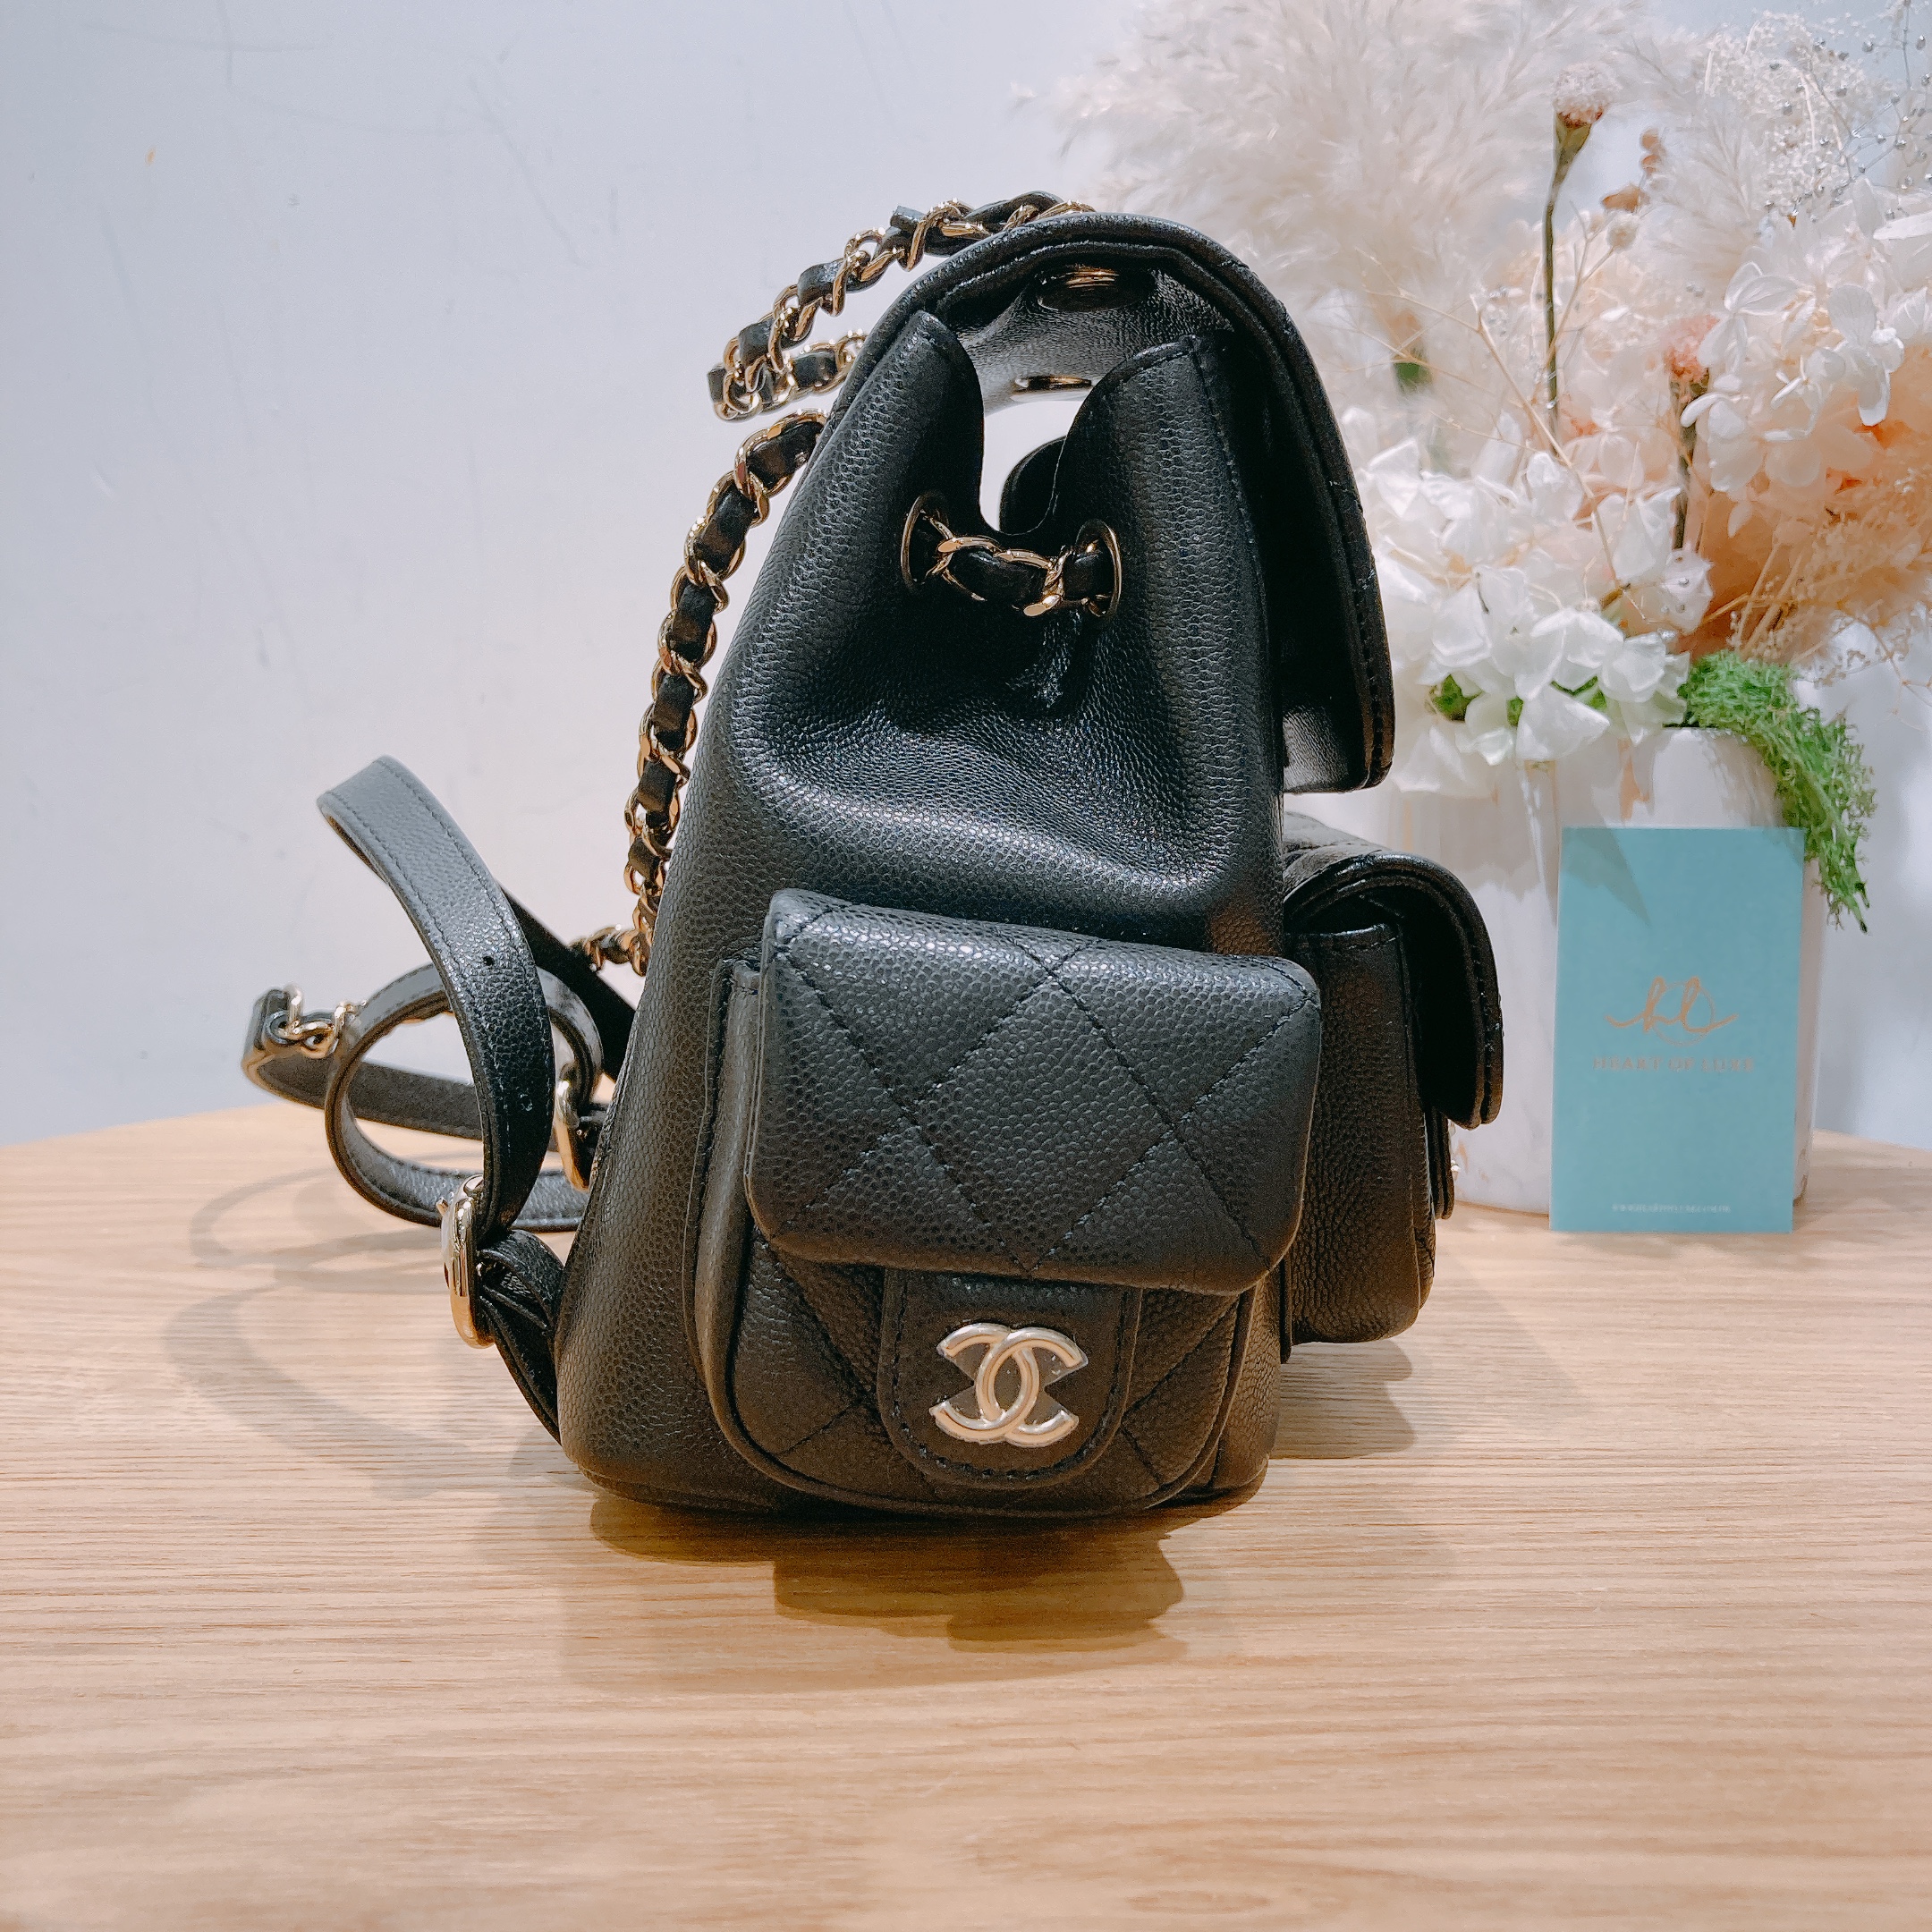 Chanel Small Backpack - Kaialux